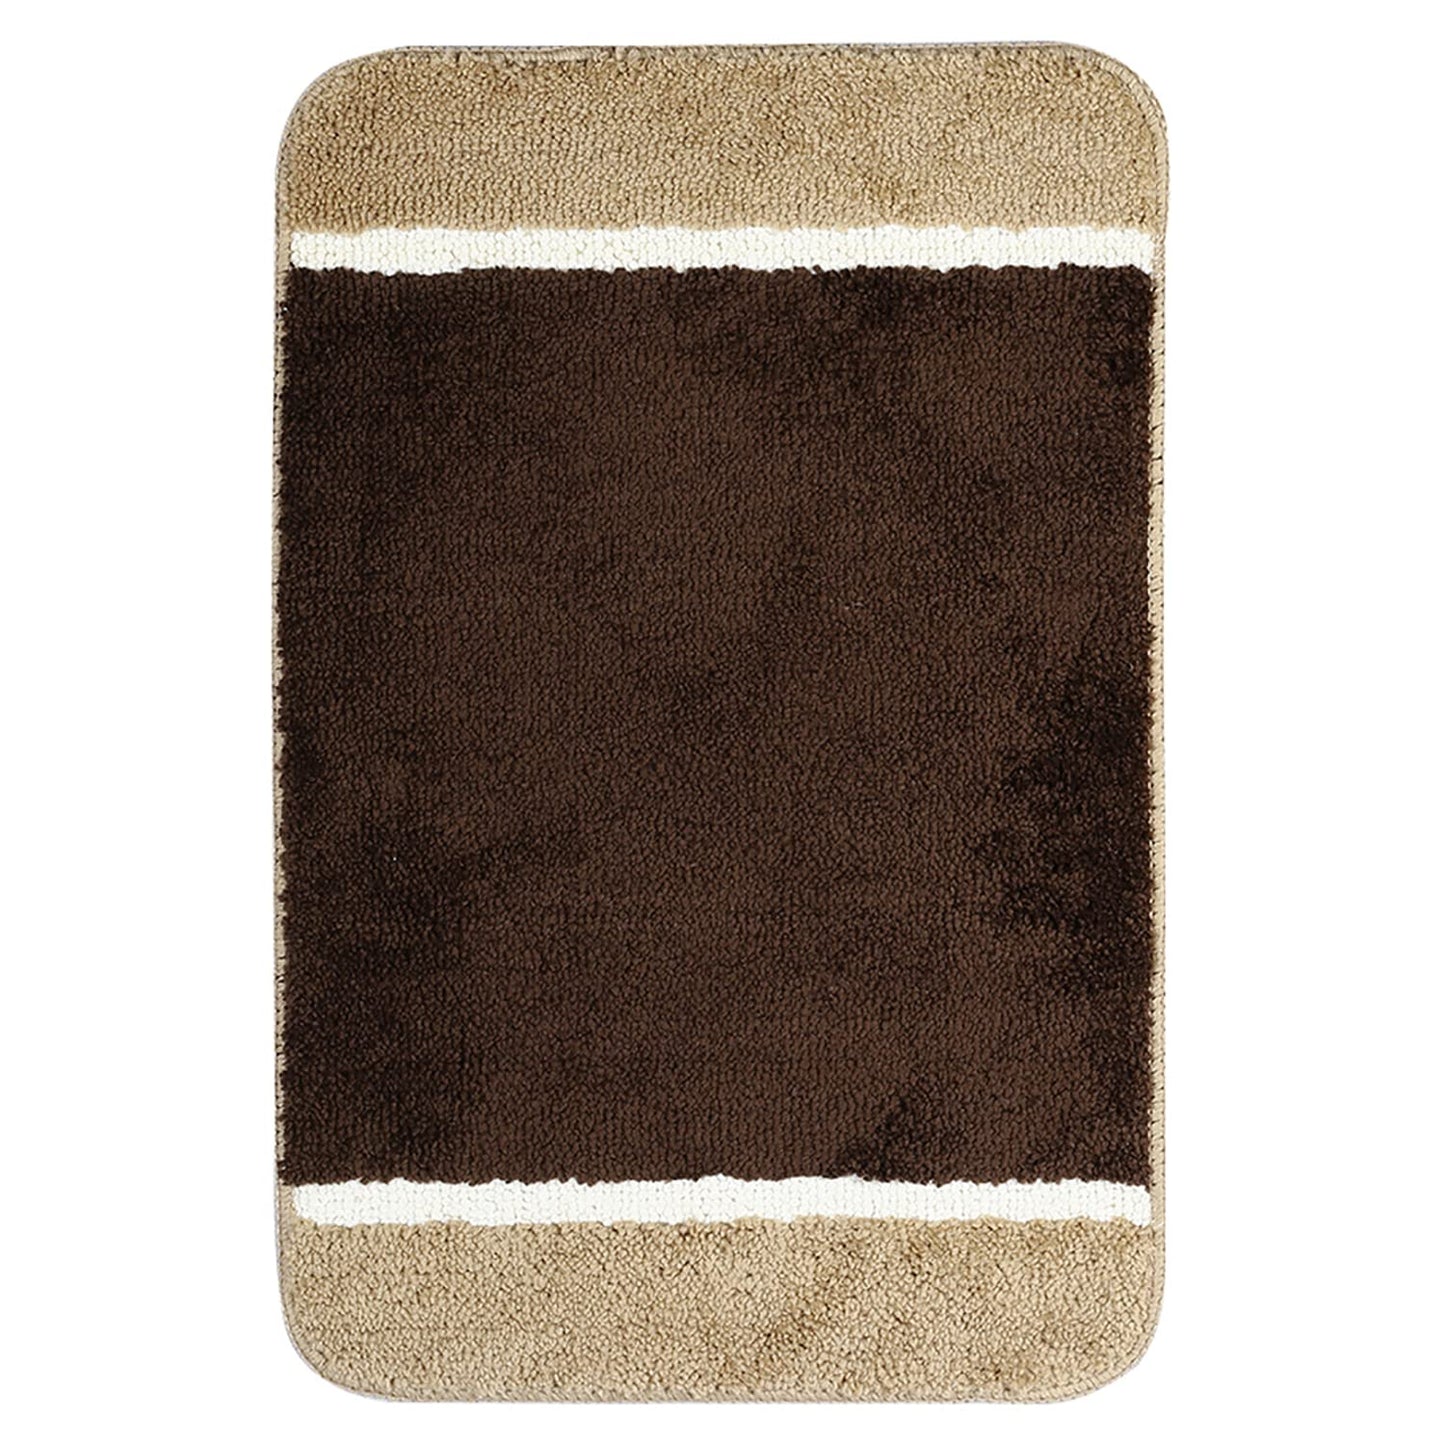 Kashyapa Rugs Collection - Affordable Mat for Floor Coffee & Beige Super Soft Microfiber Door Mats for Home & Office. pack of 1 Pcs.